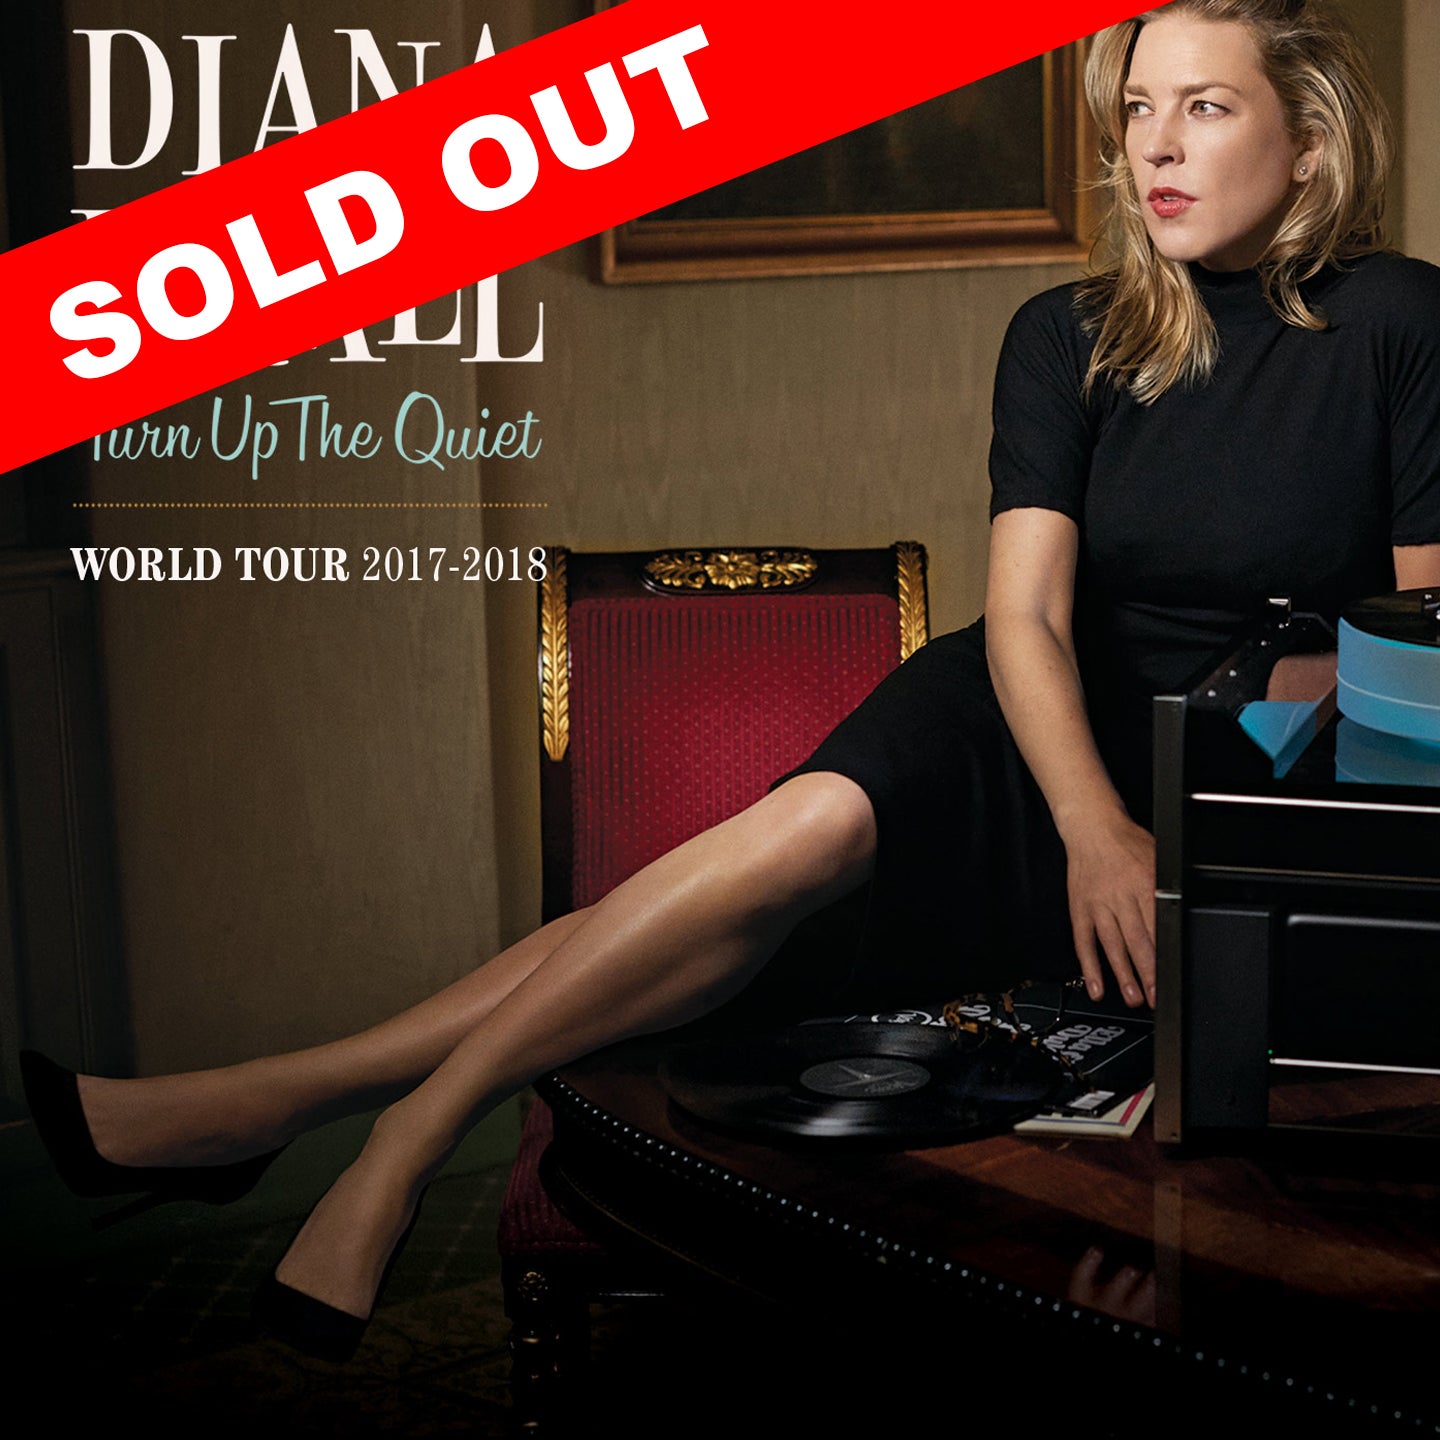 Diana Krall: Turn Up The Quiet World Tour